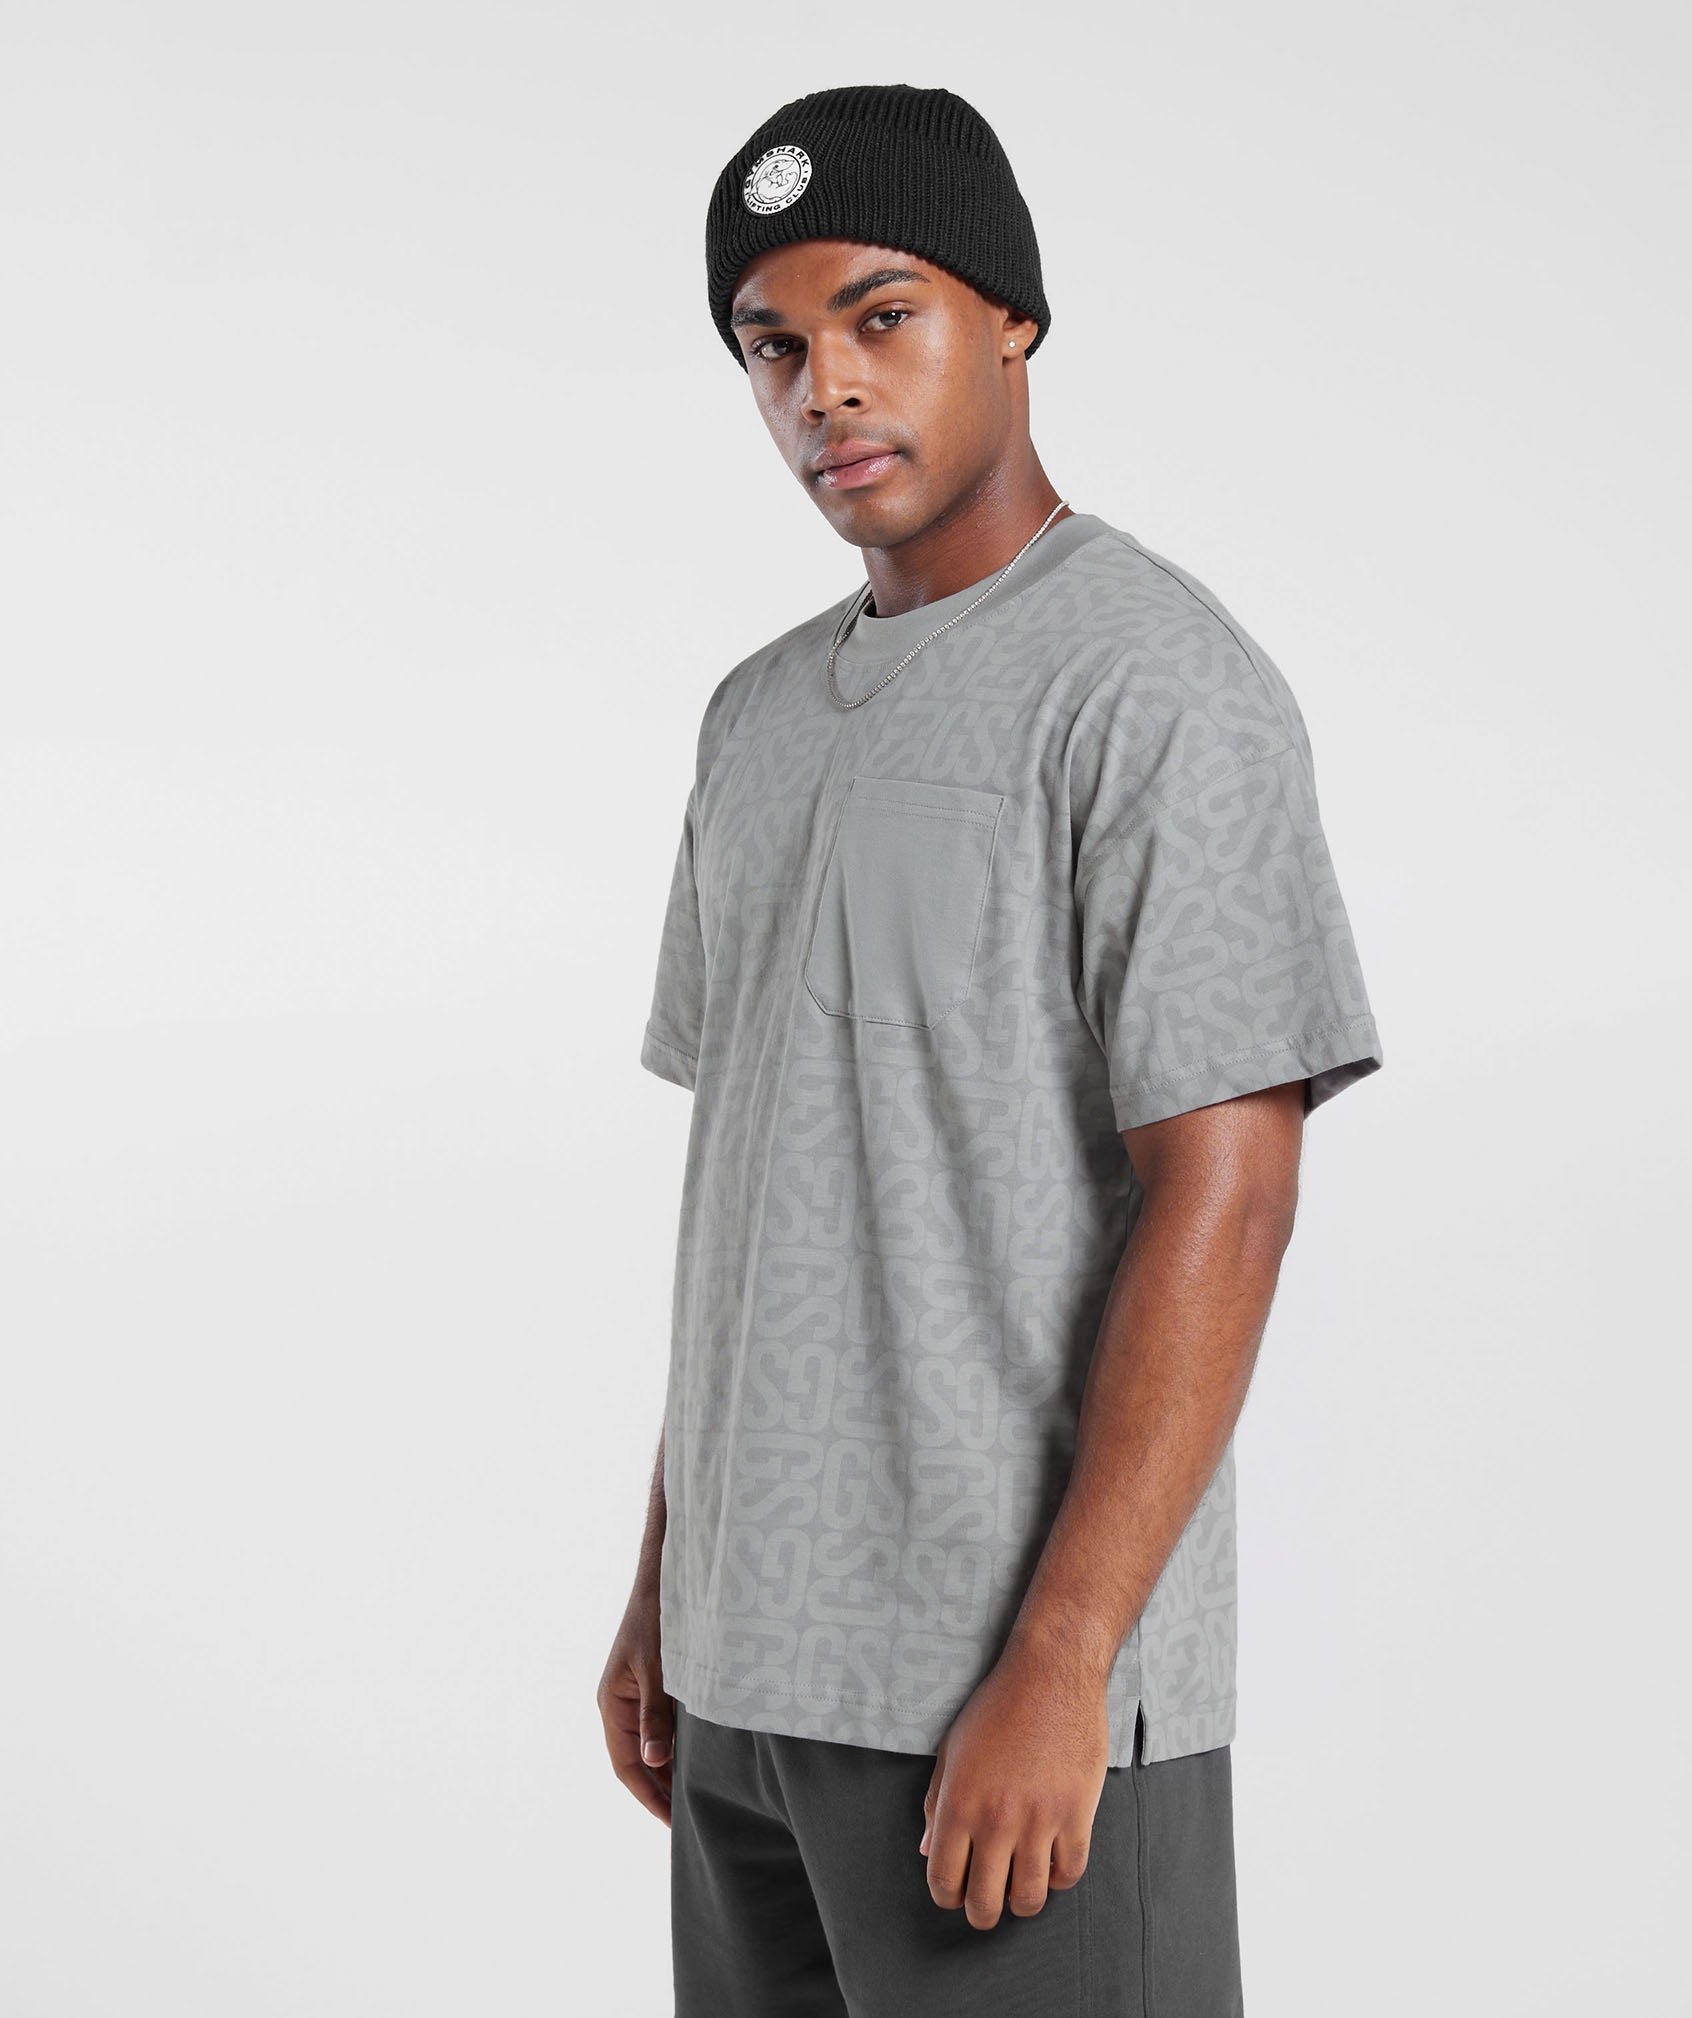 Rest Day T-Shirt in Smokey Grey - view 3